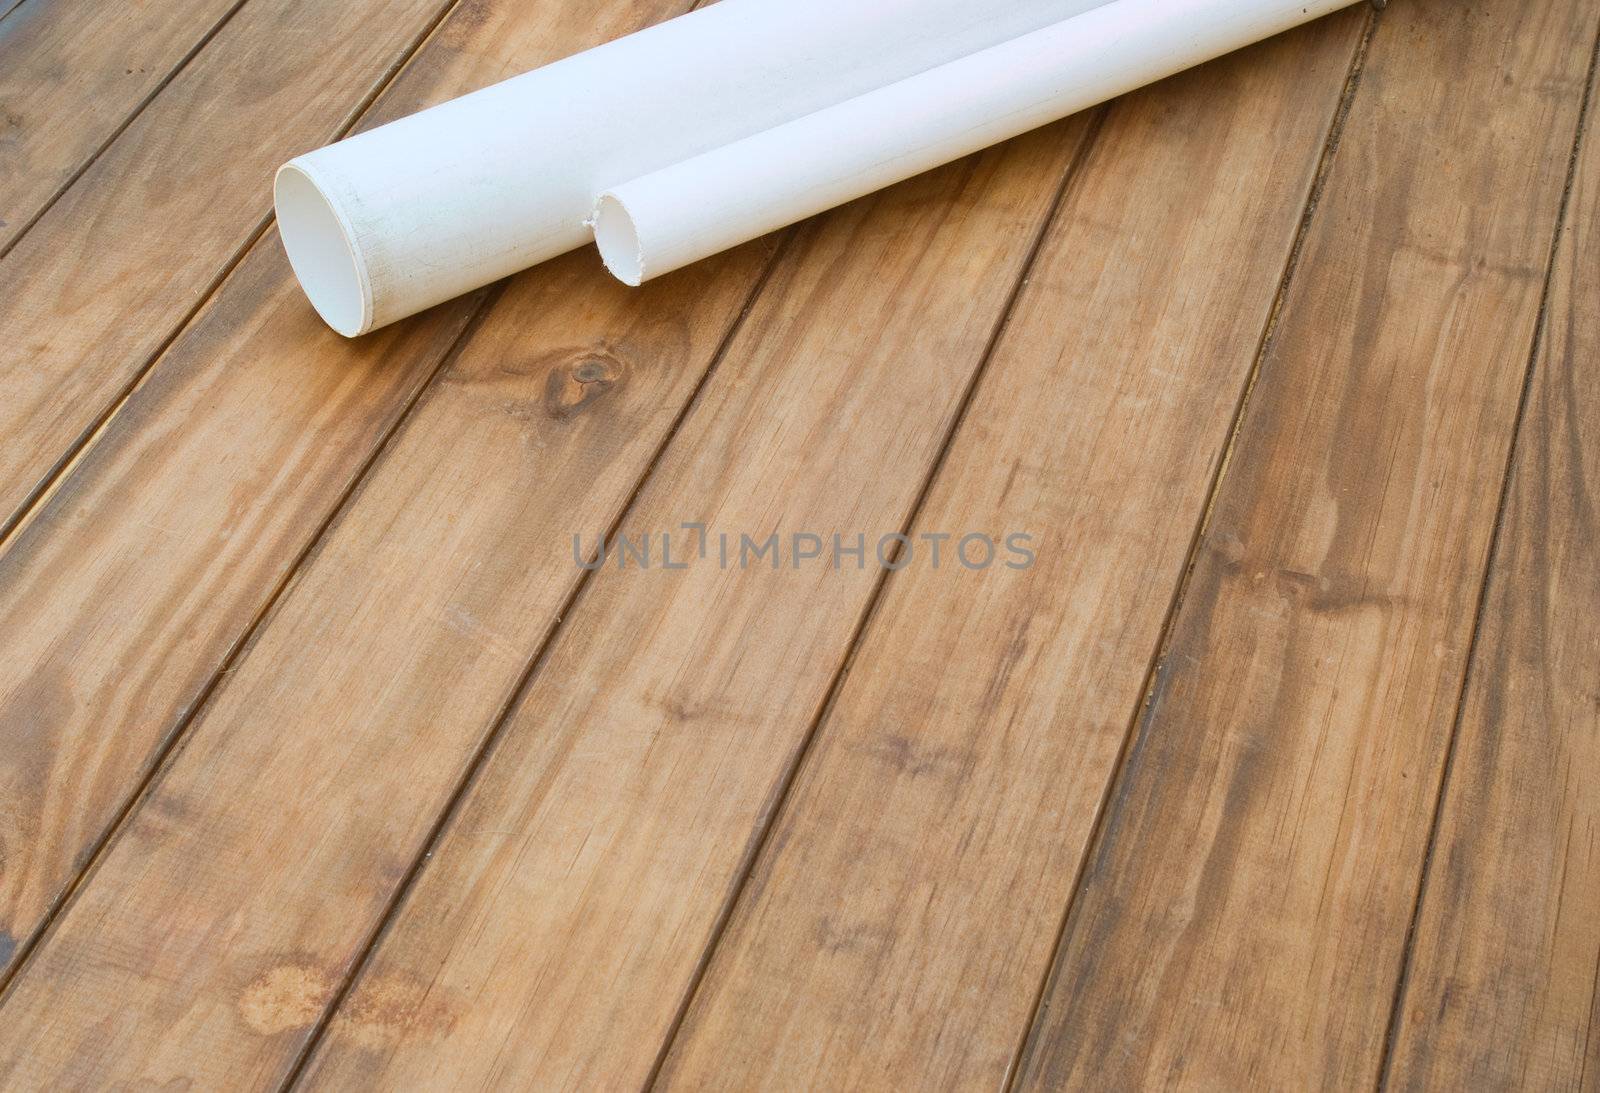 Plumbers plumbing plastic pipes on wooden work table - space for text